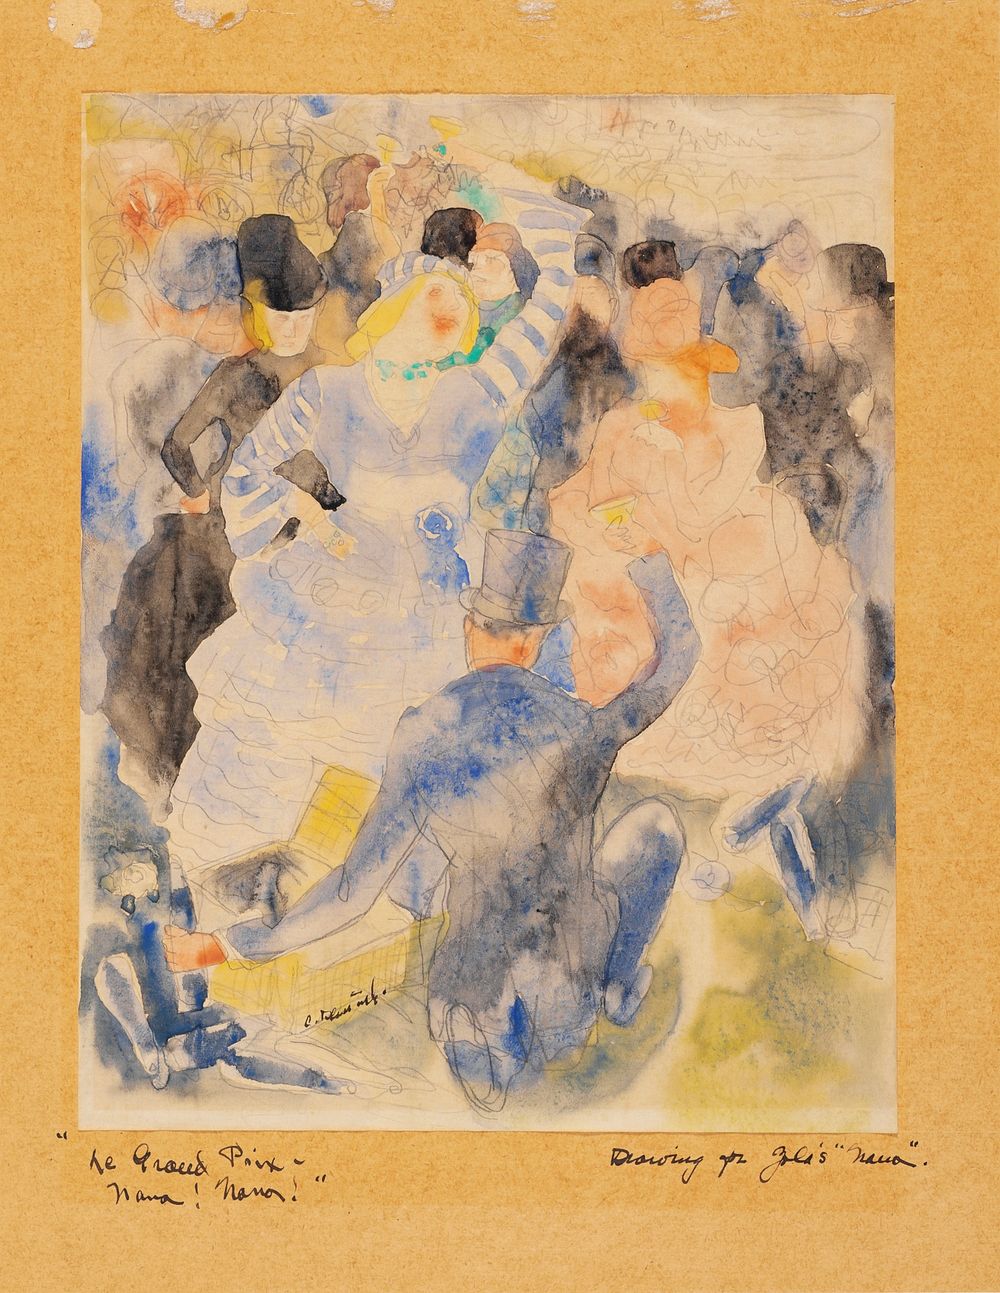 Nana at the Races by Charles Demuth